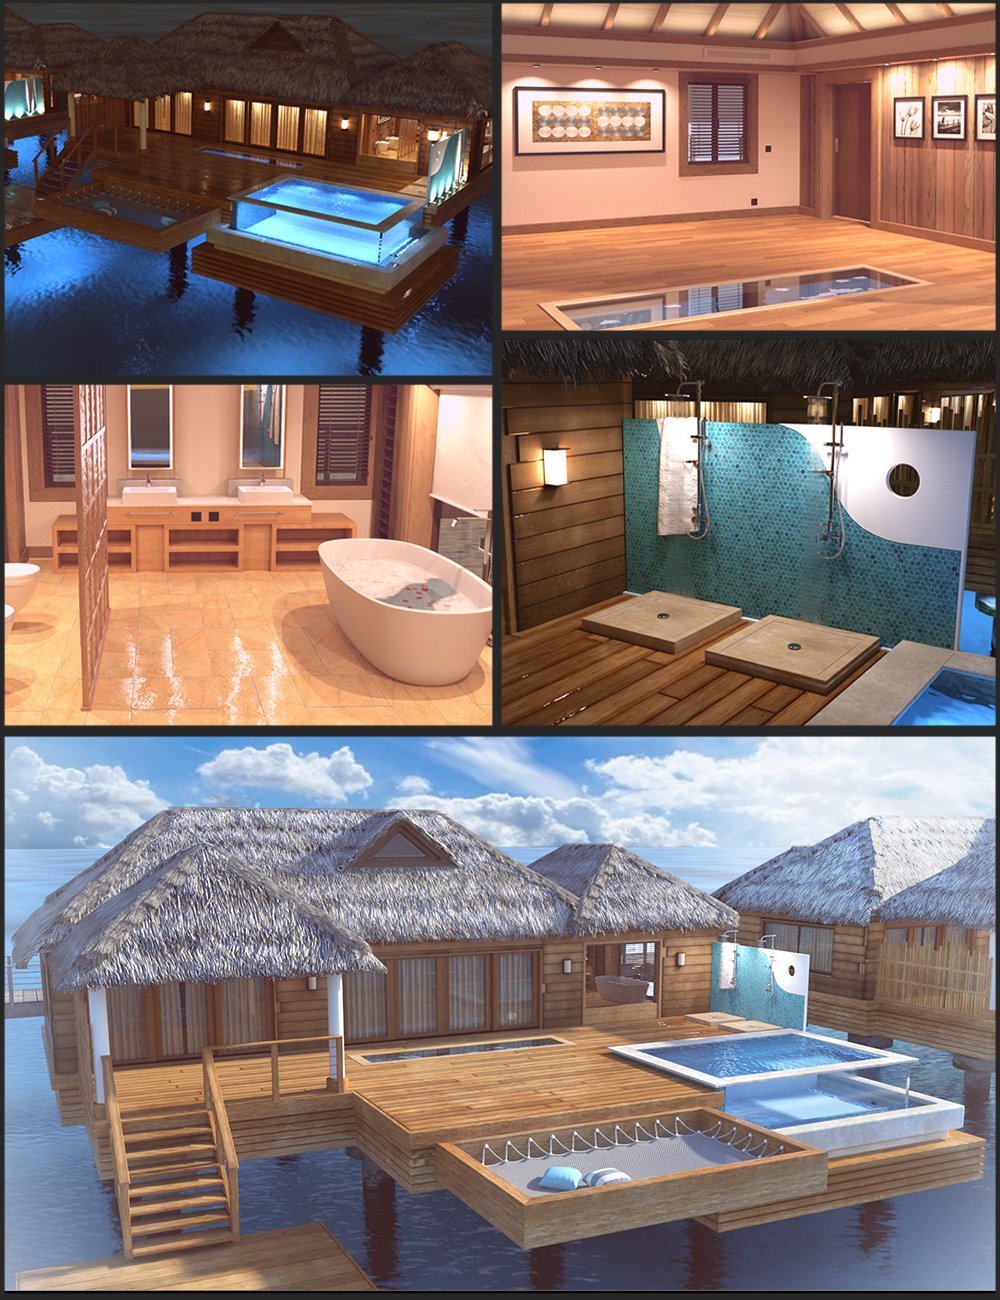 Honeymoon Overwater Bungalow by: Polish, 3D Models by Daz 3D